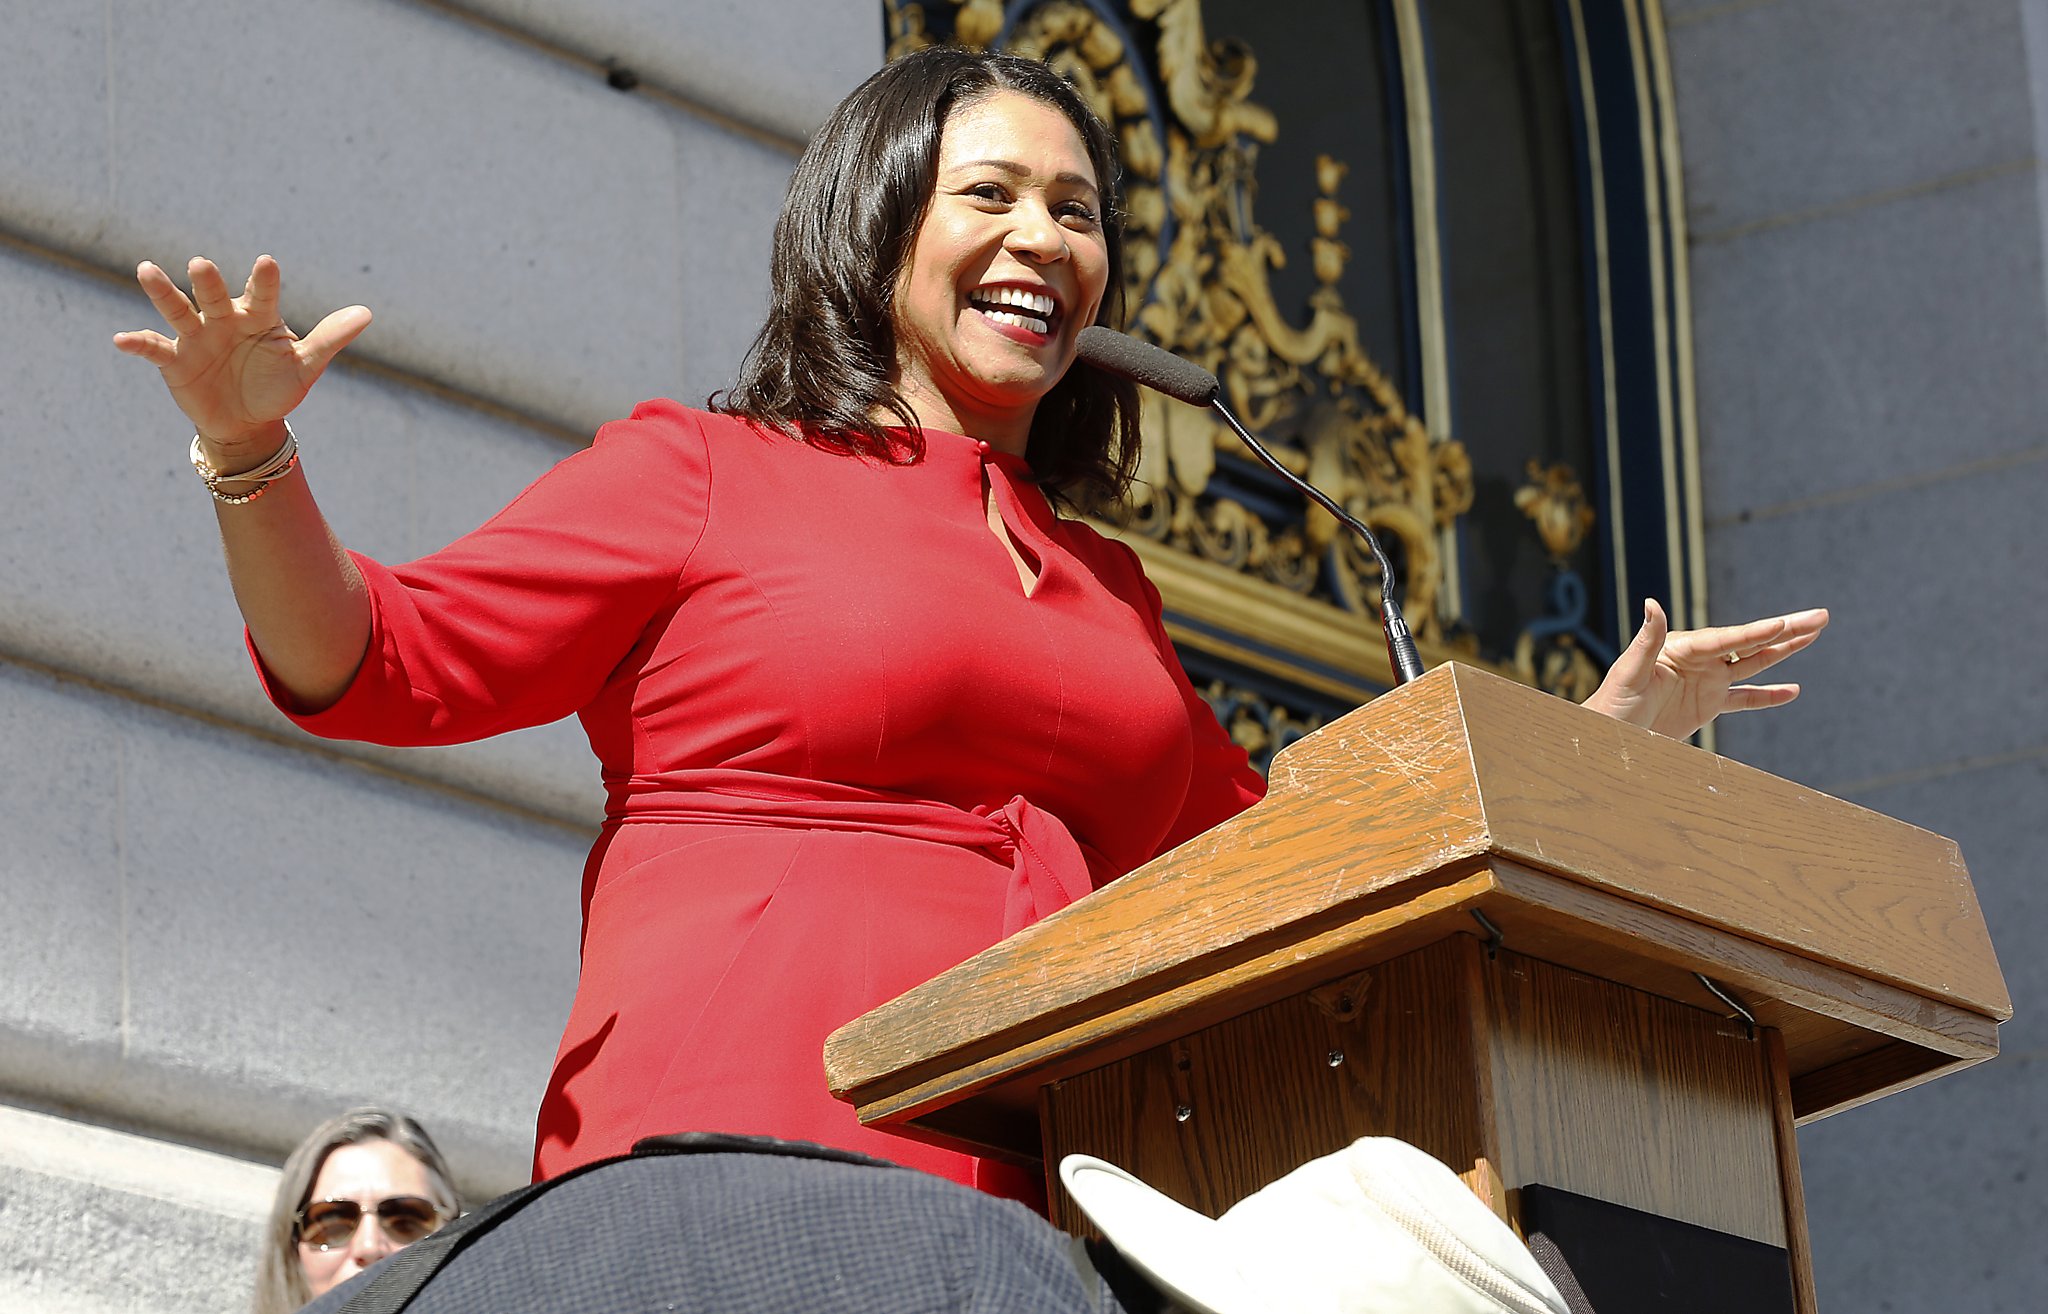 London Breed uses new clout to help old friend - SFChronicle.com